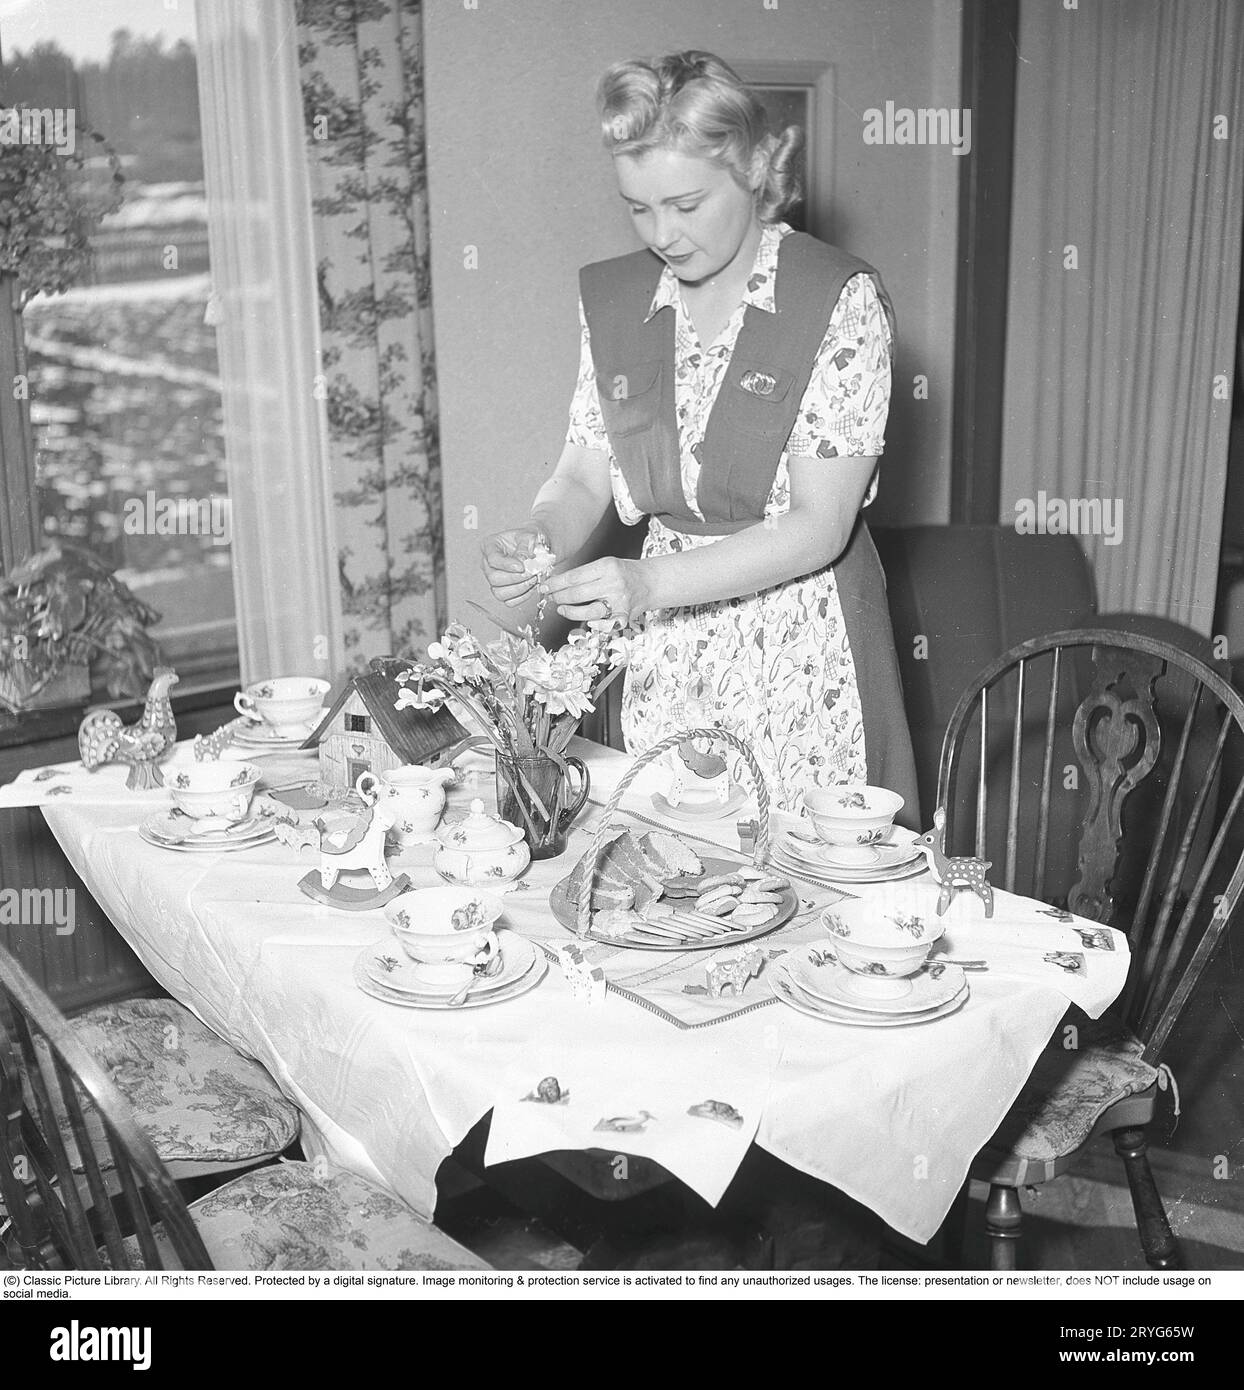 In the 1940s. A woman has set a table for Easter and arranges daffodils to be placed in a vase on the table. The table is set with fine china with double plates. A cake plate with sponge cake and cookies is on the table. An Easter bun is placed on the table. Sweden 1945. Kristoffersson ref N72-5 Stock Photo